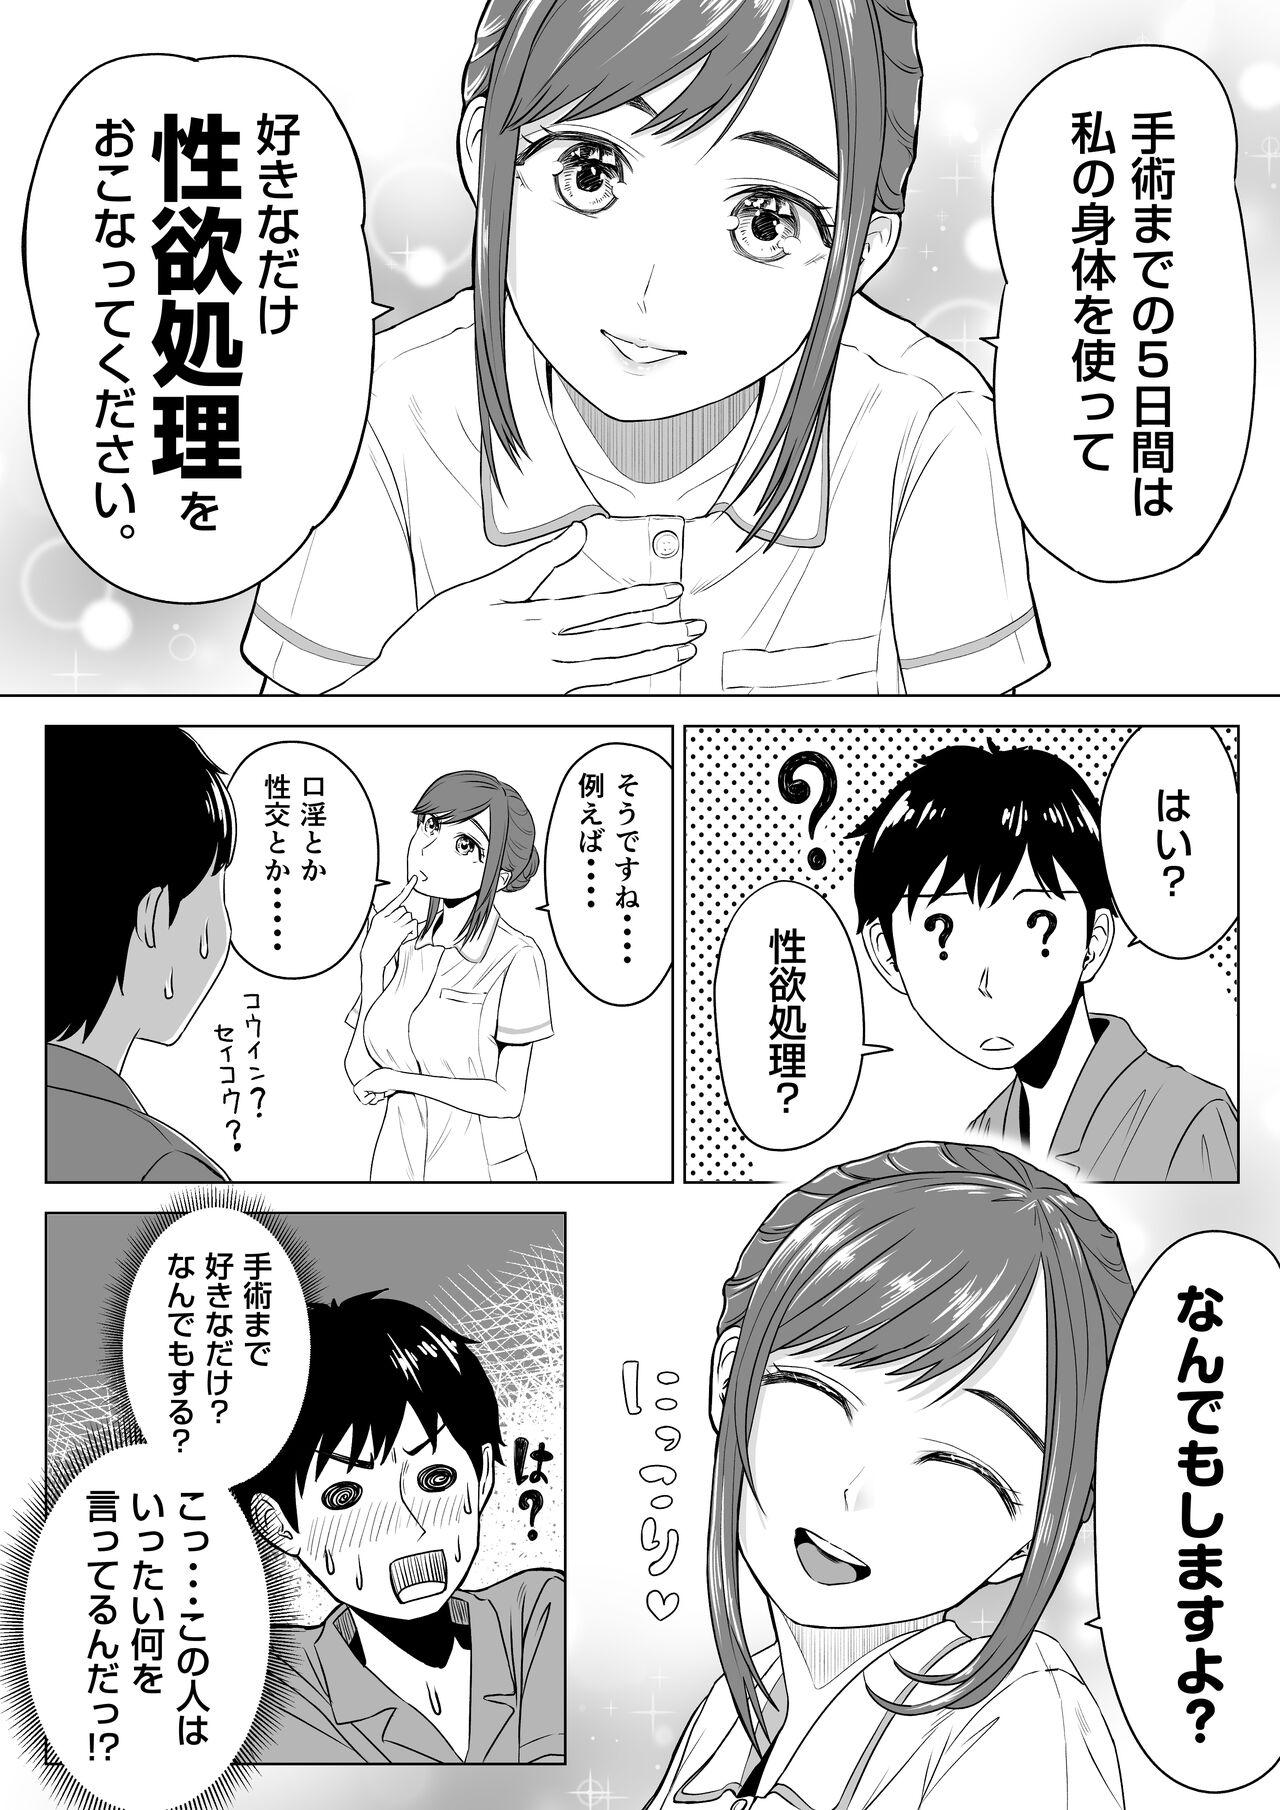 All 高橋あゆみさんは医療従順者 - Original Doggy Style - Page 6